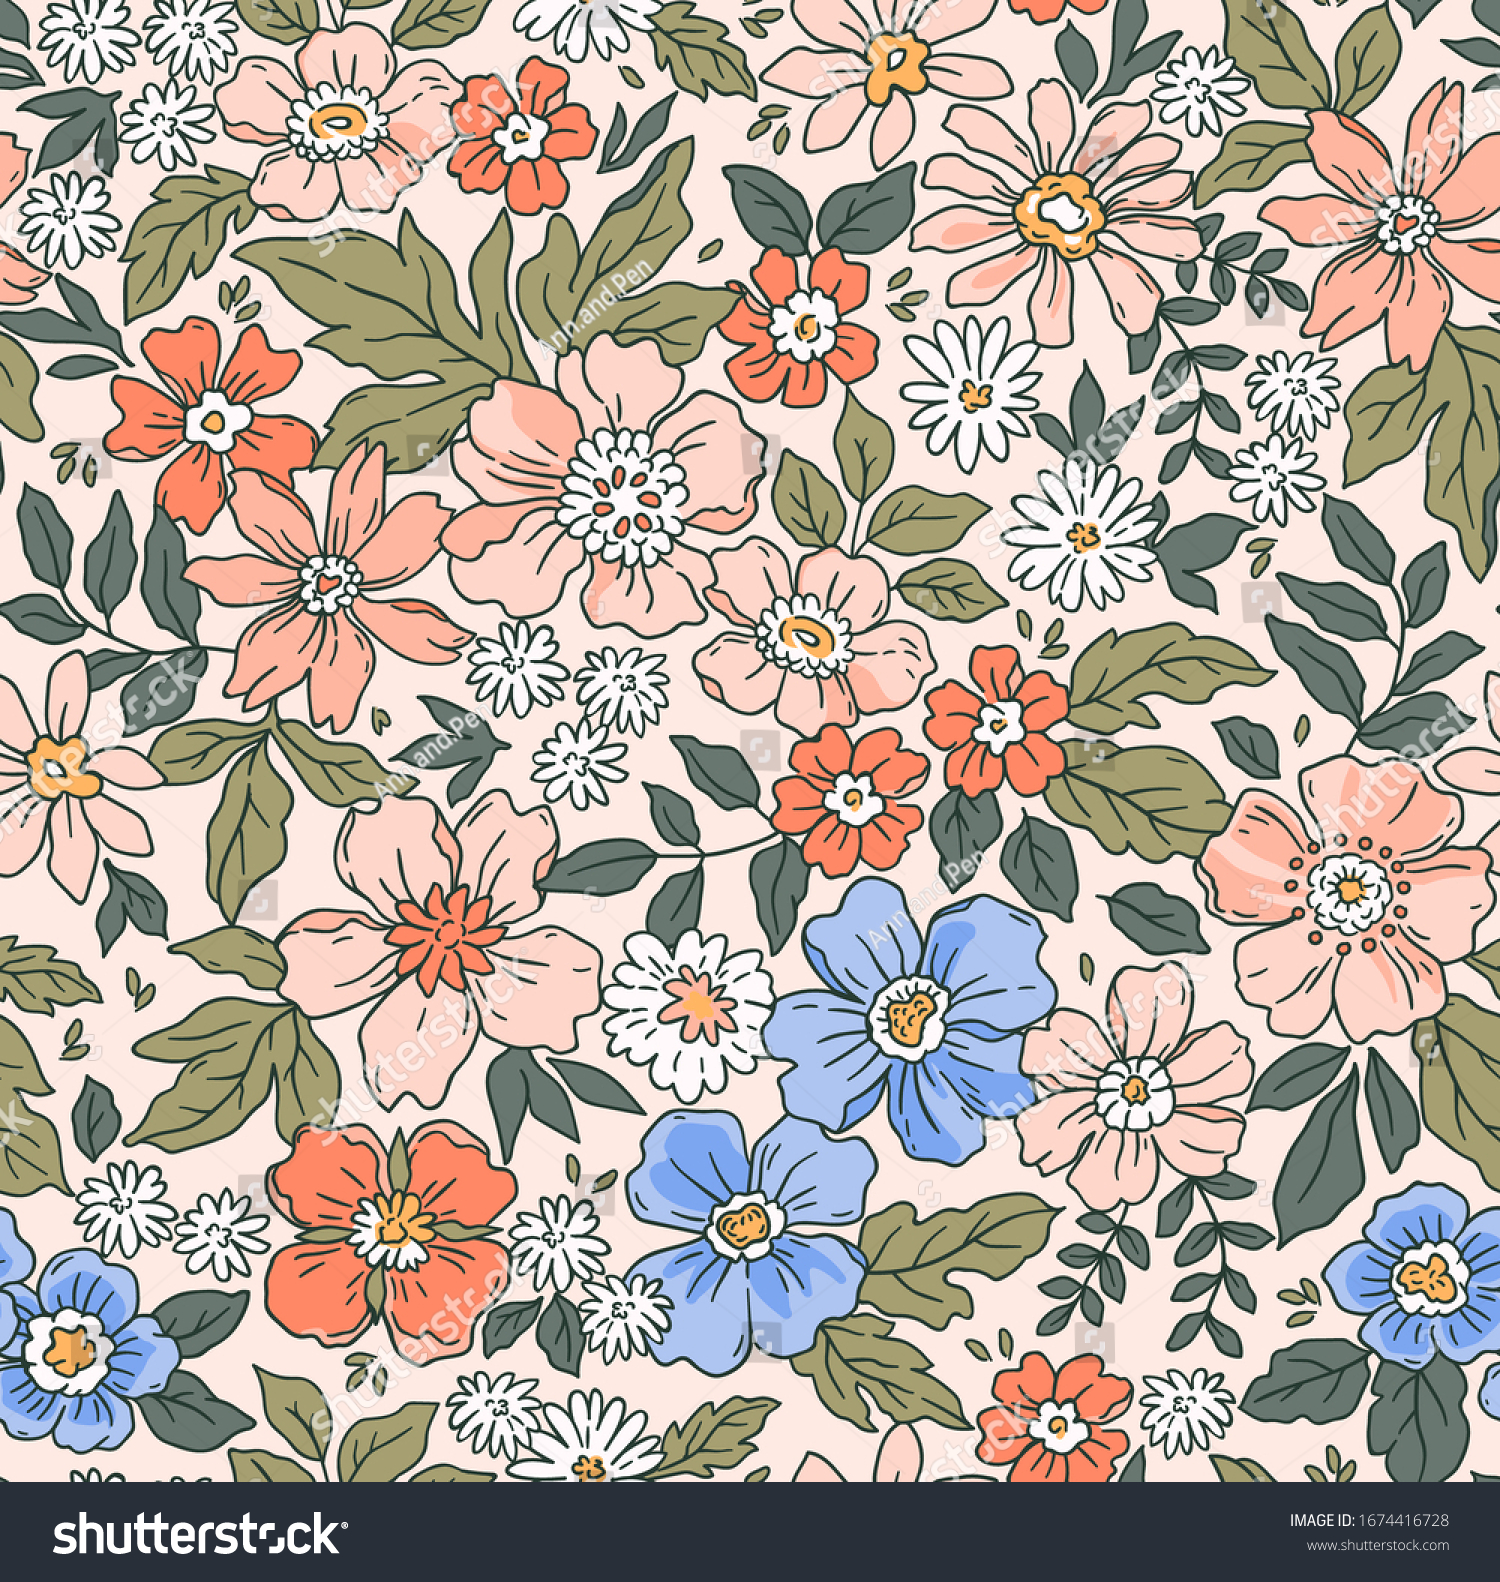 Elegant floral pattern in small hand draw flowers. Liberty style. Floral seamless background for fashion prints. Vintage print. Seamless vector texture. Spring bouquet.